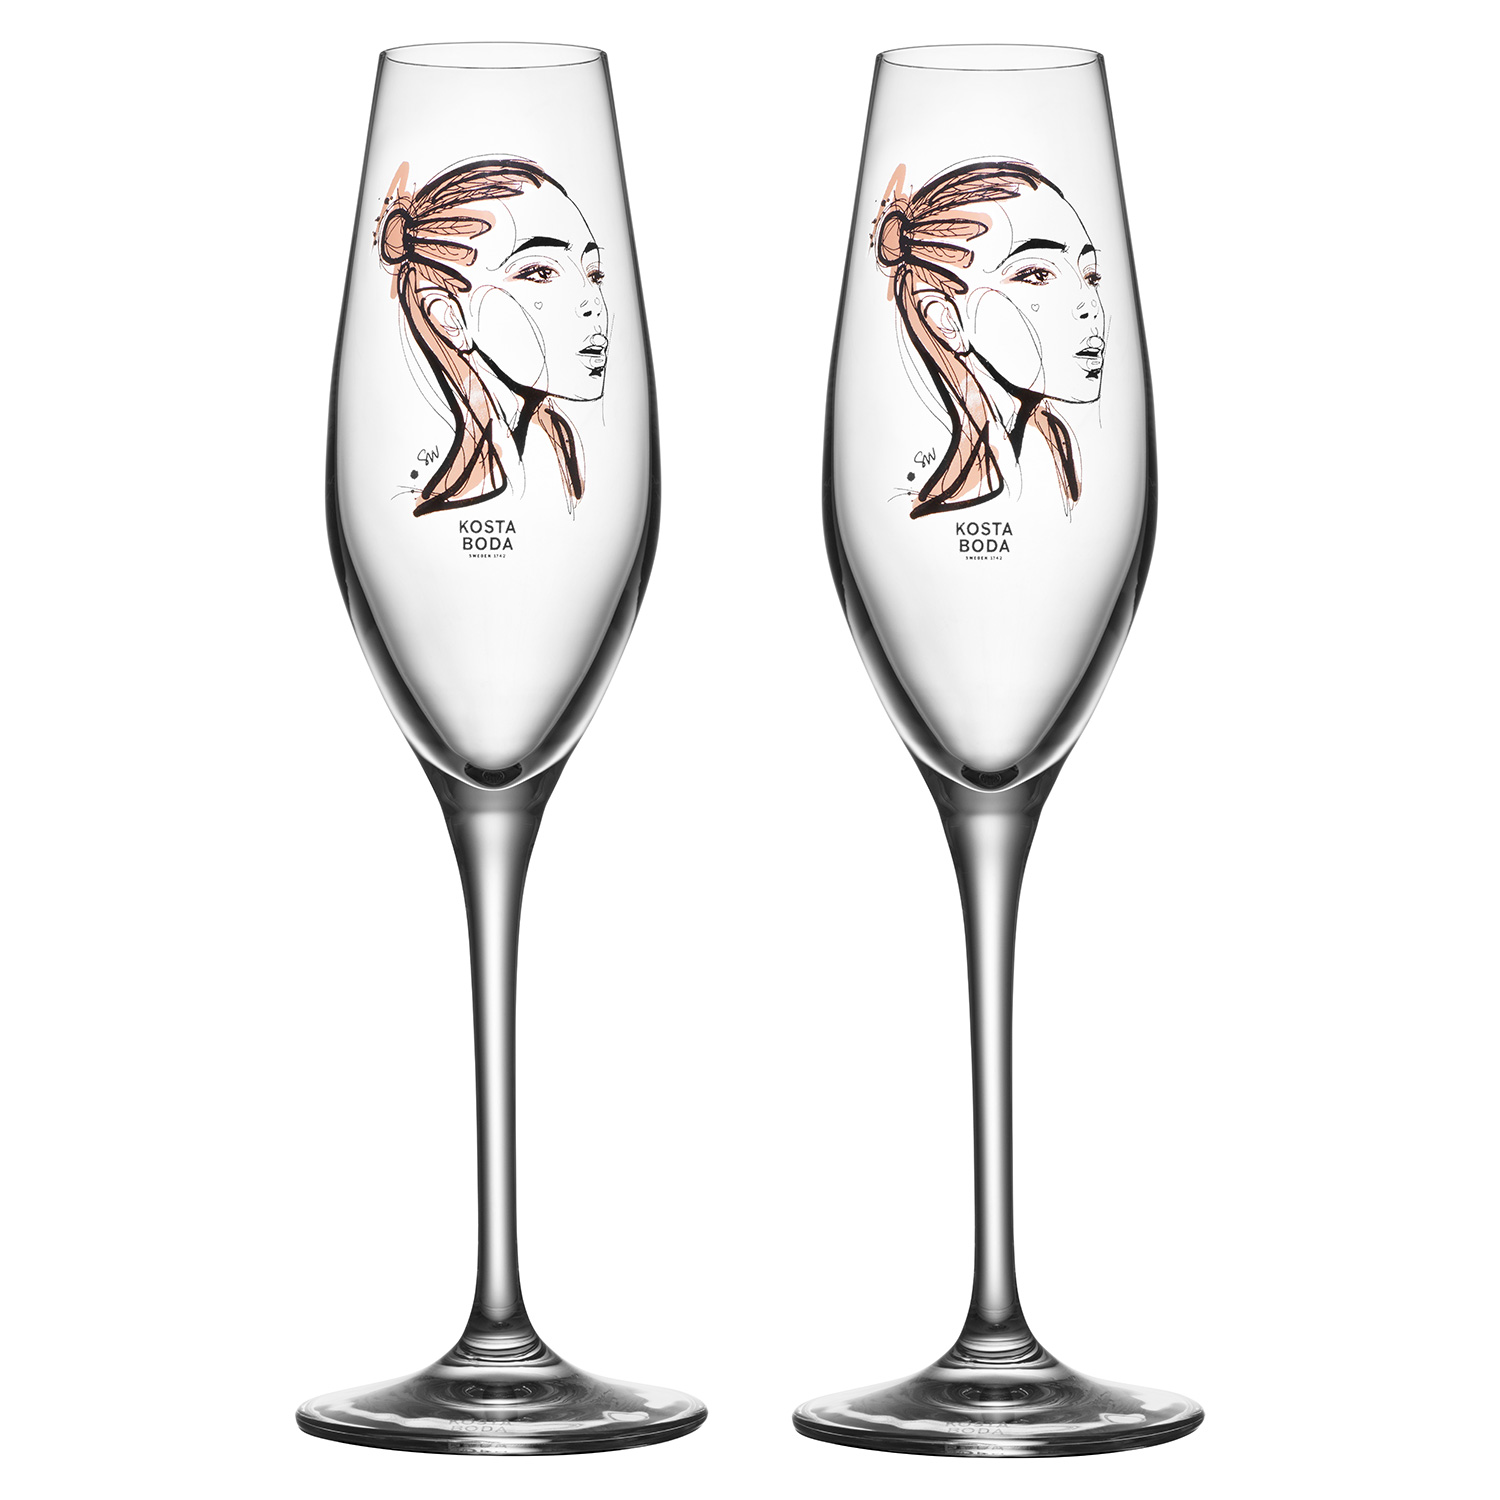 All About You Champagneglas 23 cl Forever Yours - Kosta Boda @ Rum21.dk